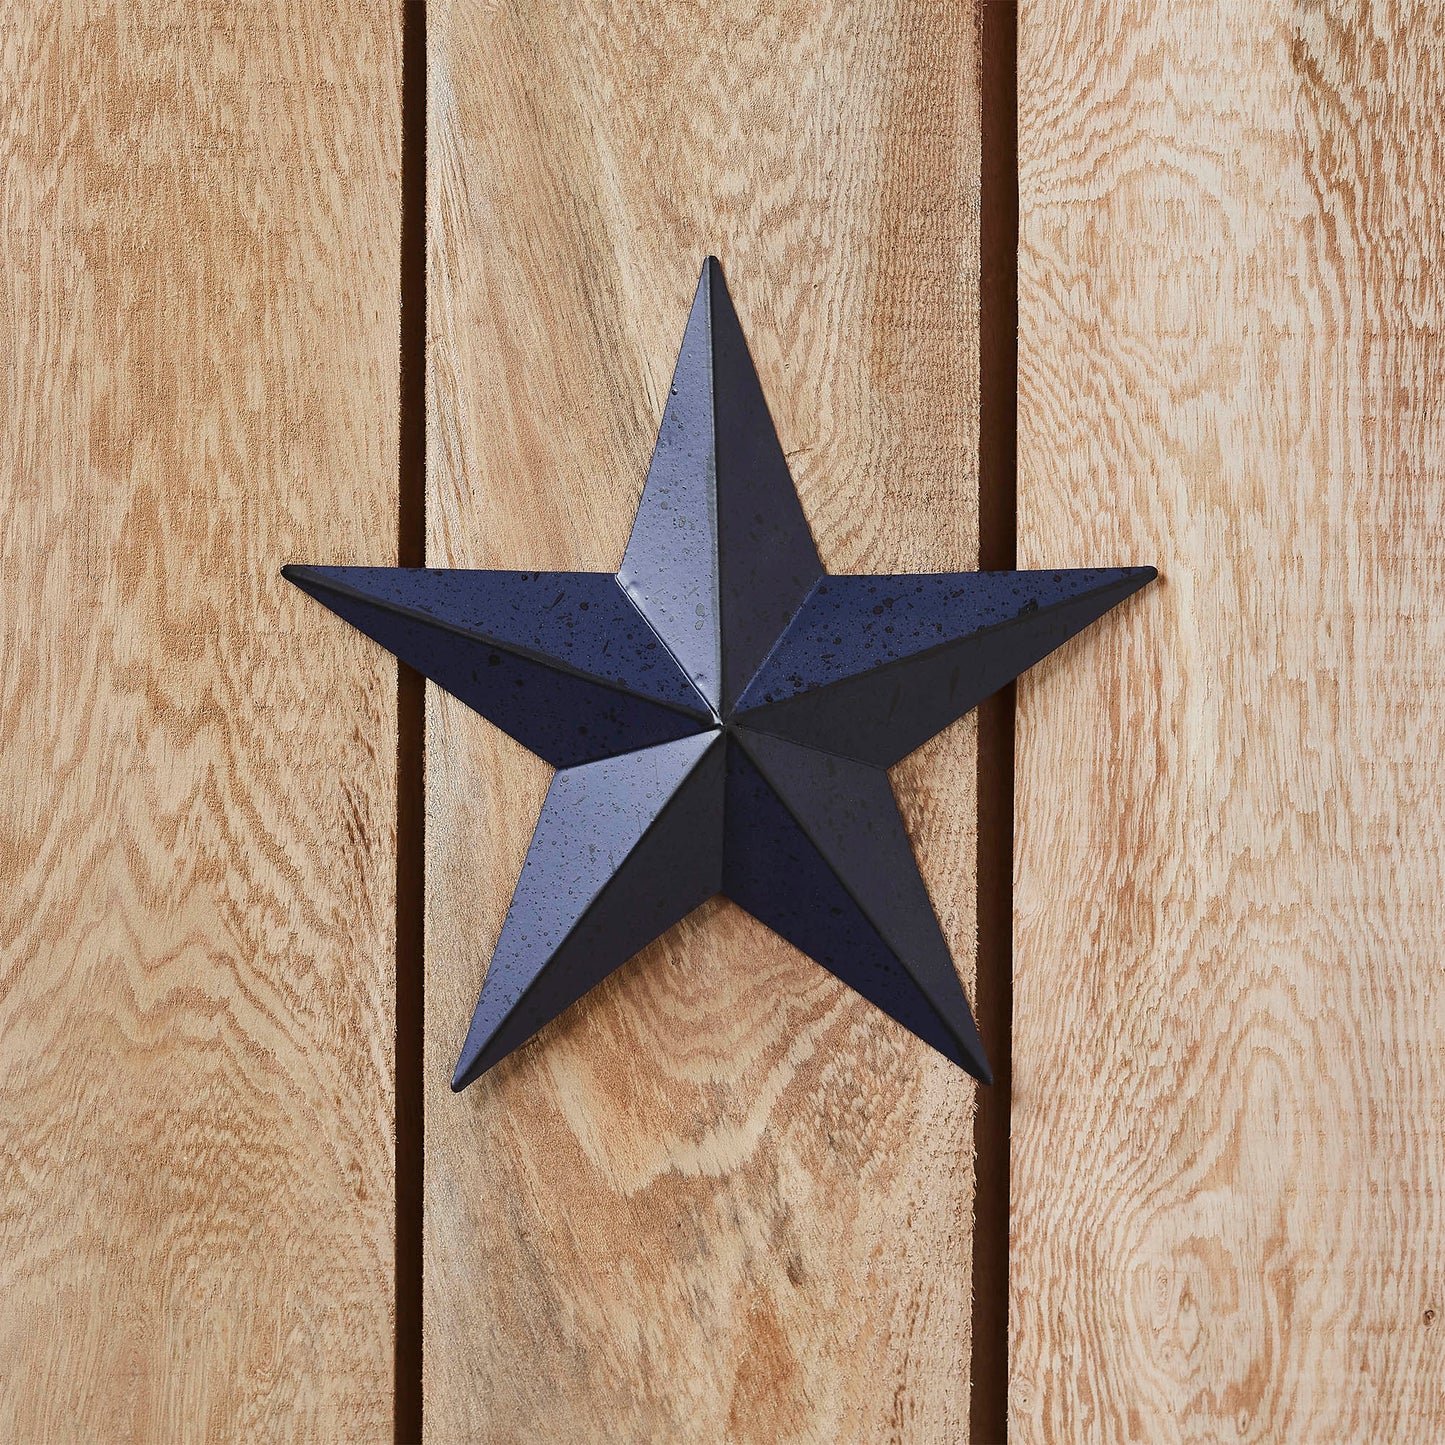 VHC Brands Patriotic Faceted Metal Star Navy Wall Hanging 8x8, Independence Day Decor, American Star Design, Distressed Appearance Metal Wall Hanging,  Star Shape, Country, Navy